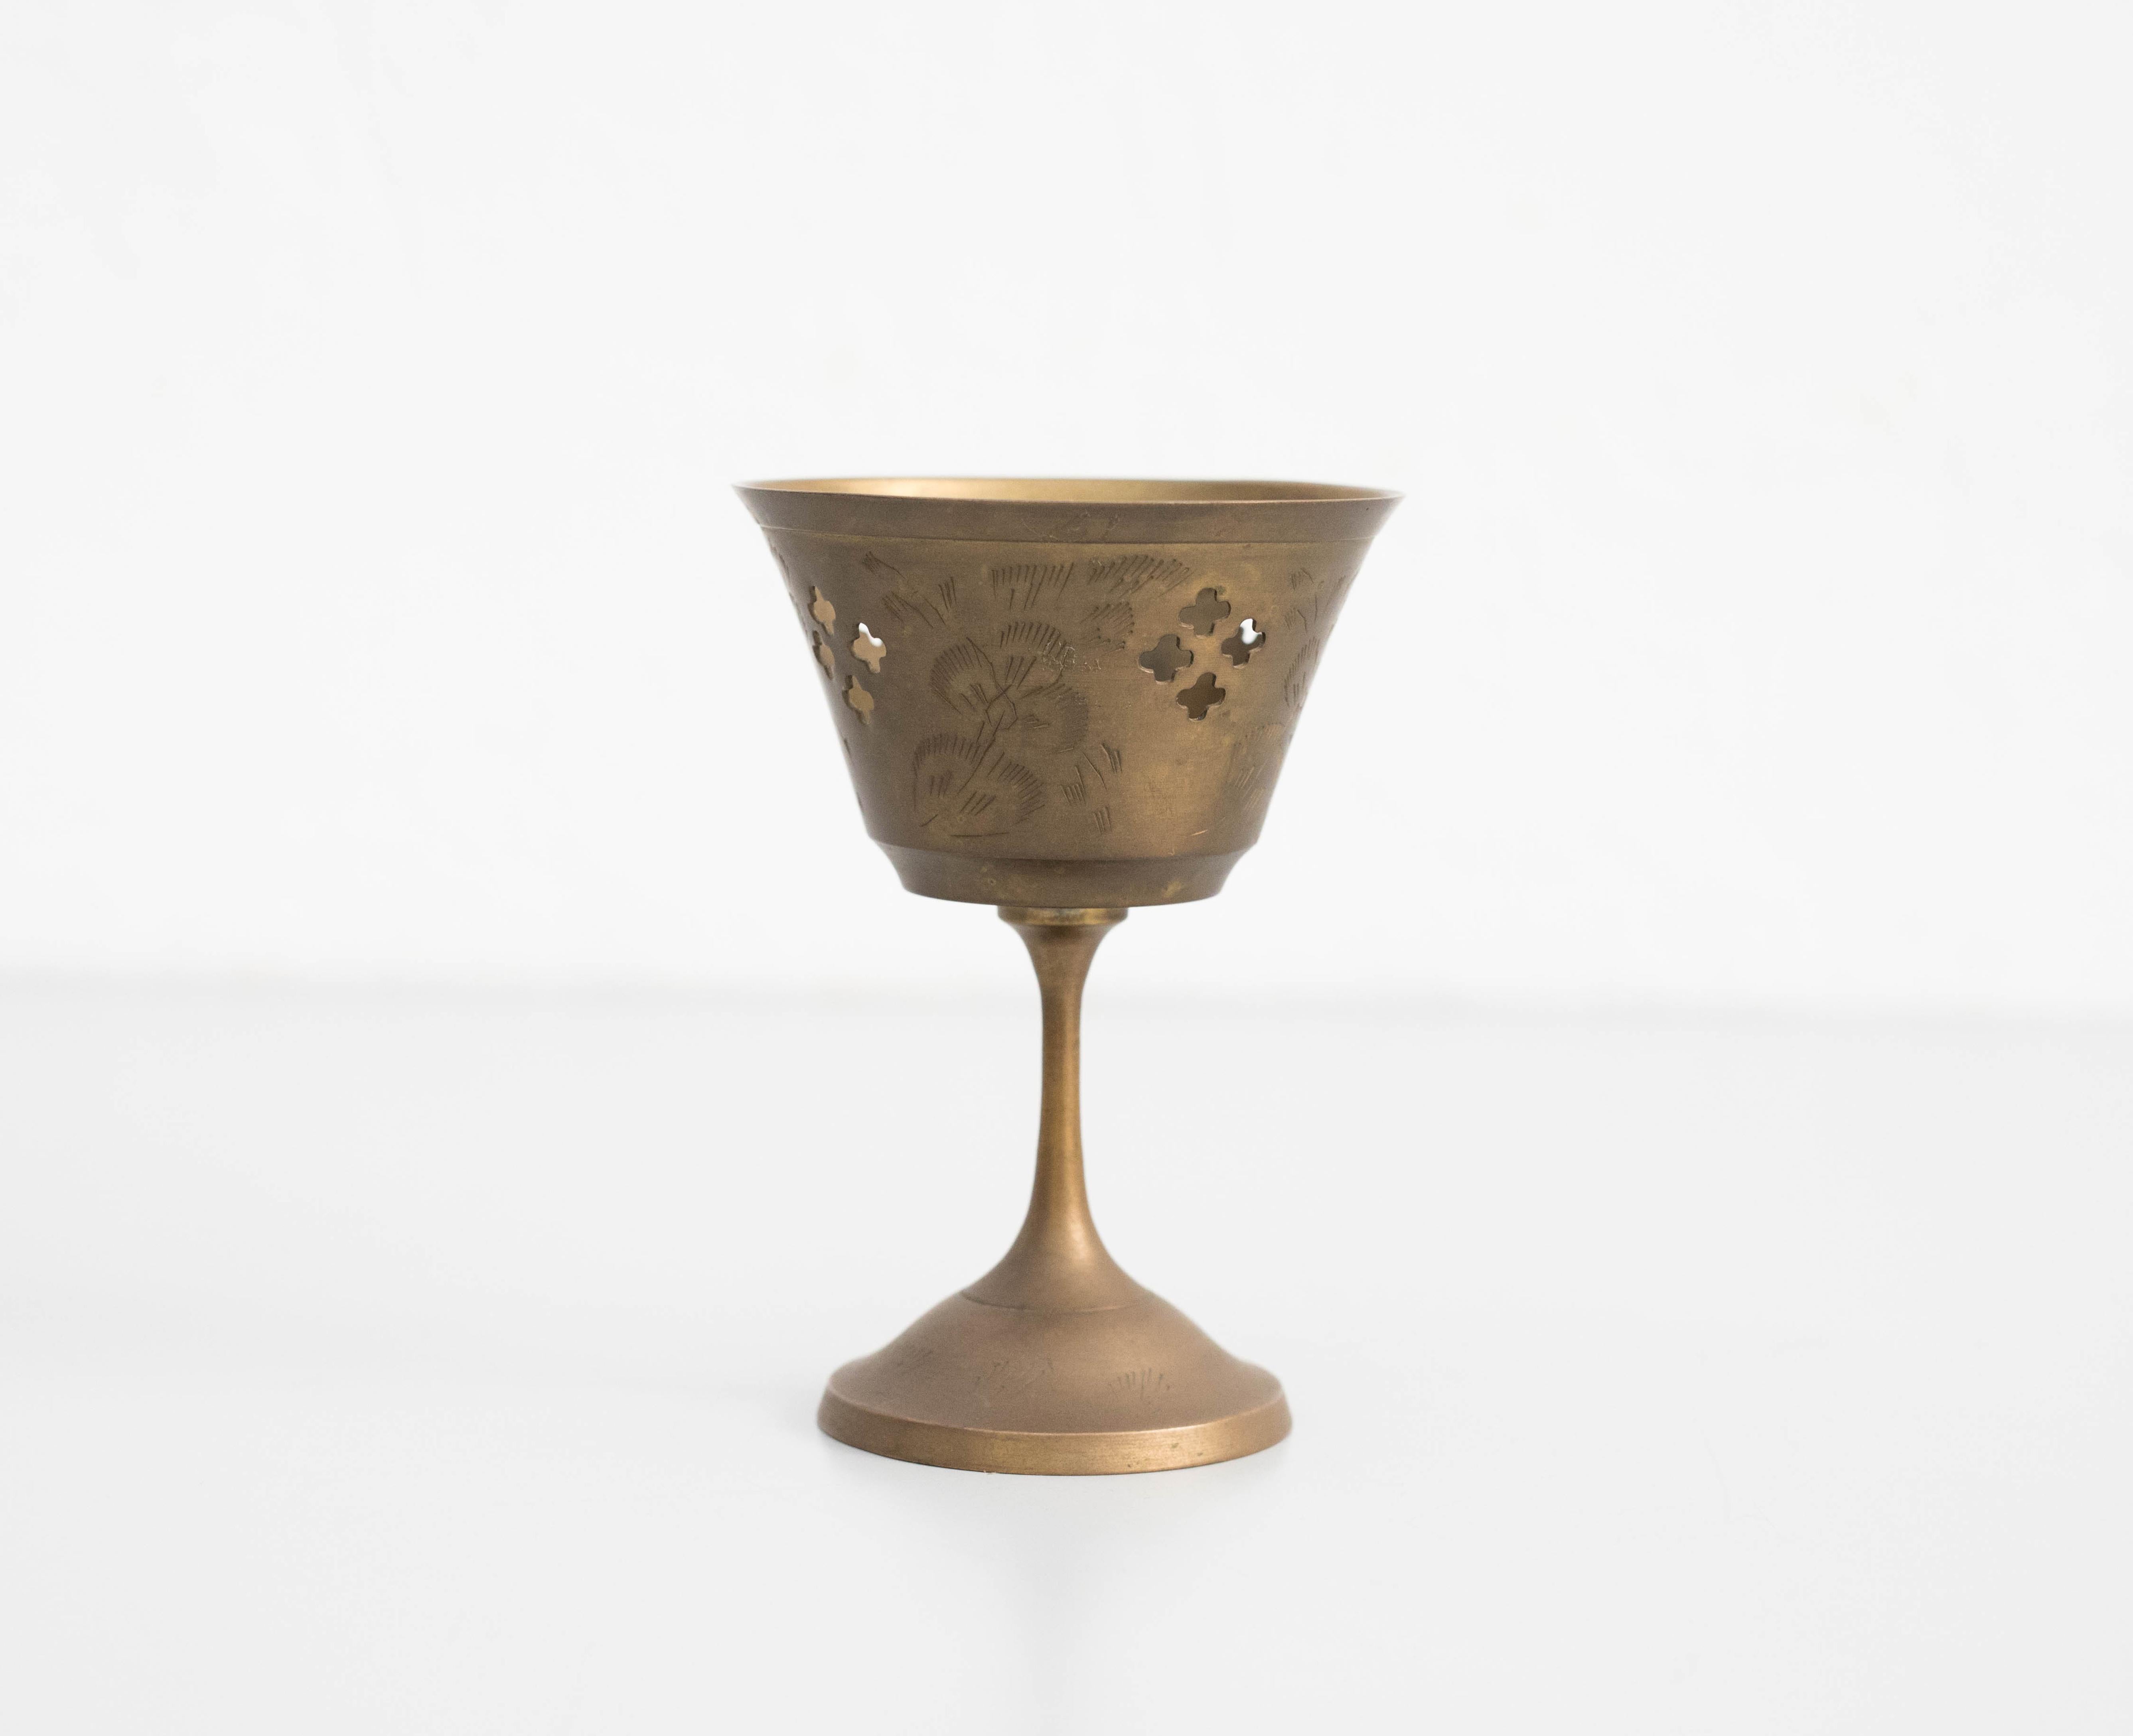 Early 20th chalice.
by unknown manufacturer, Spain.

In original condition, with minor wear consistent with age and use, preserving a beautiful patina.

Materials:
Metal

Dimensions:
Ø 11.5 cm x H 14.5 cm.